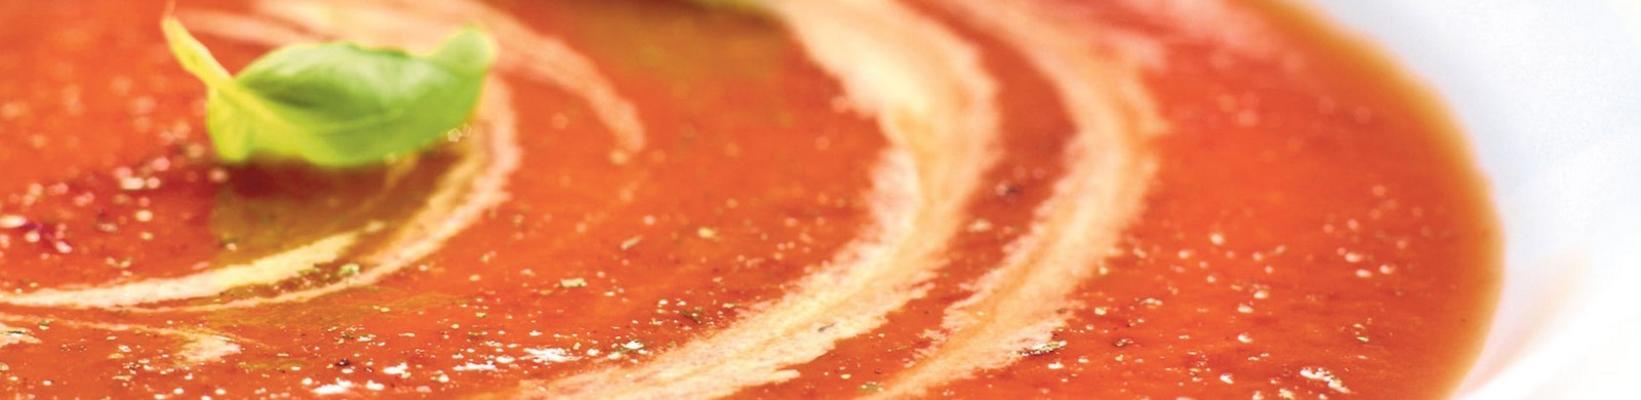 Italian tomato soup from stale